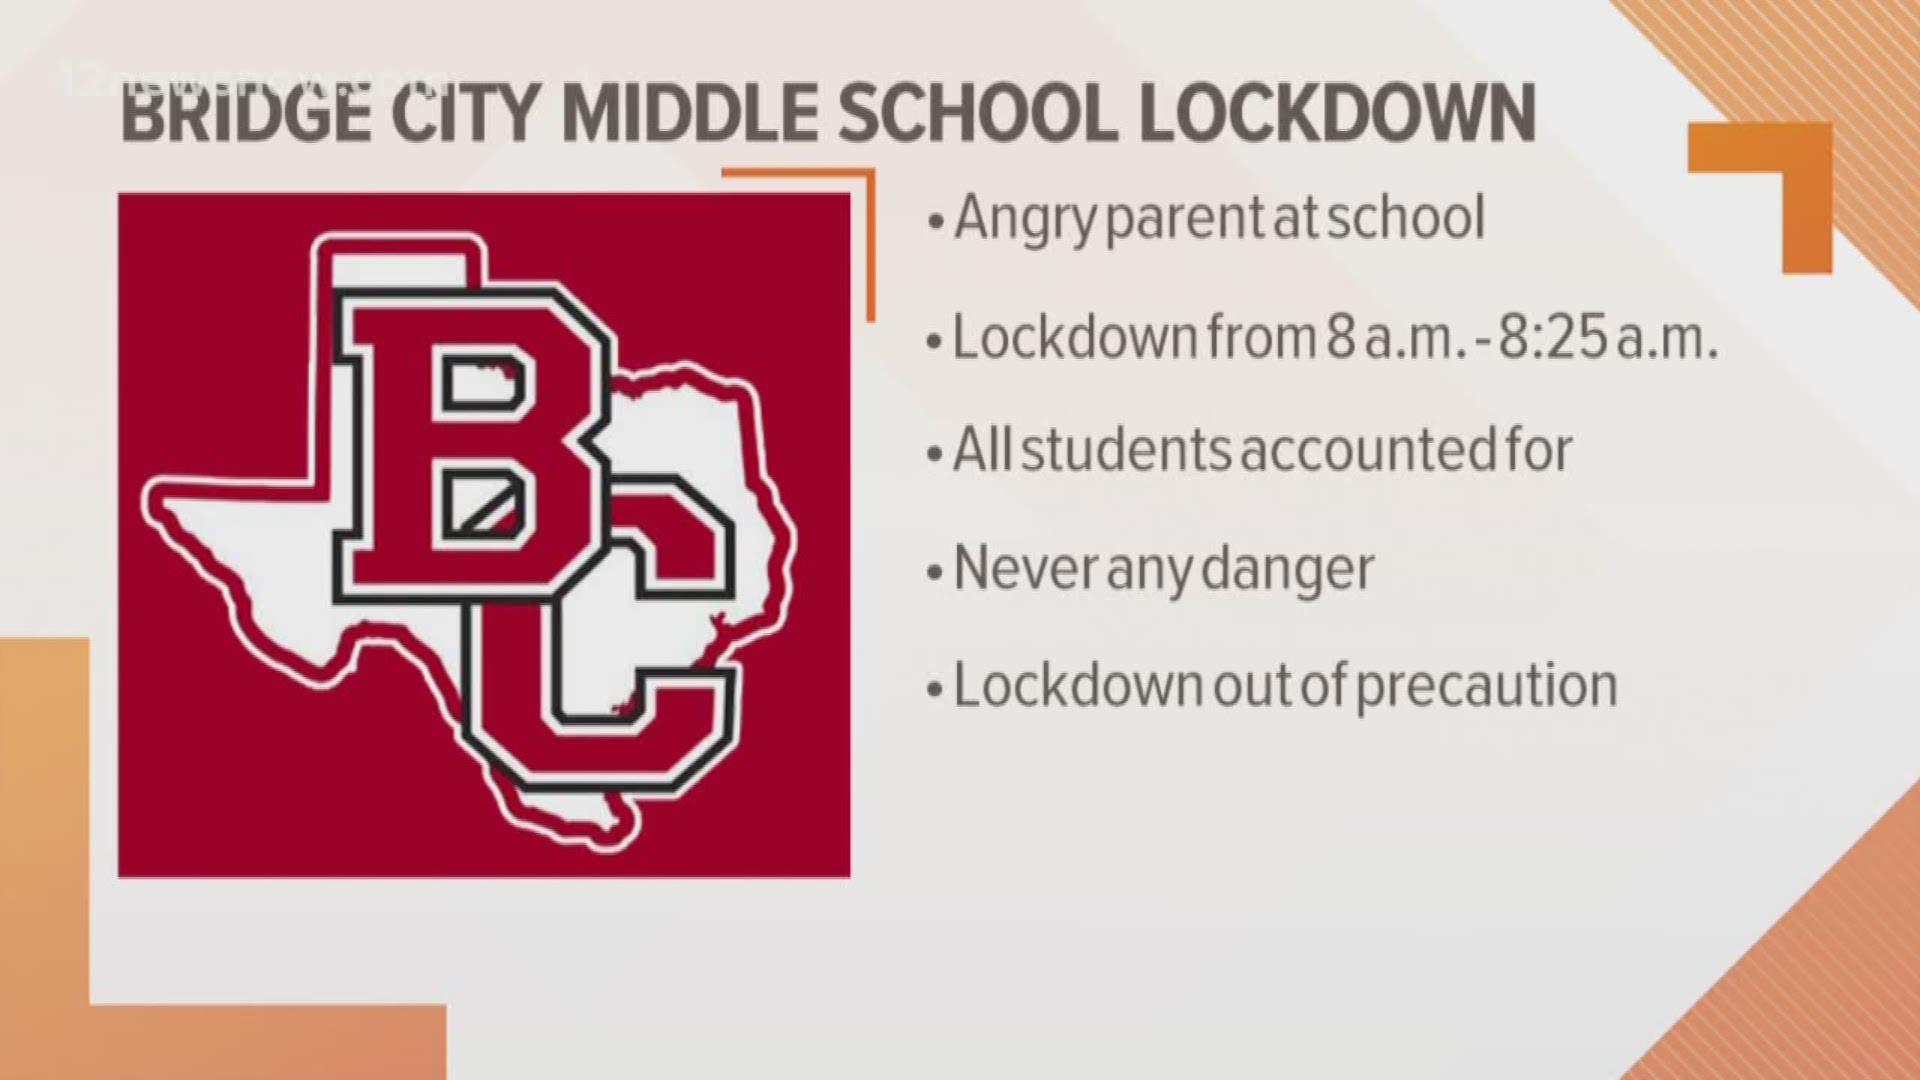 The lockdown lasted less than 30 minutes.